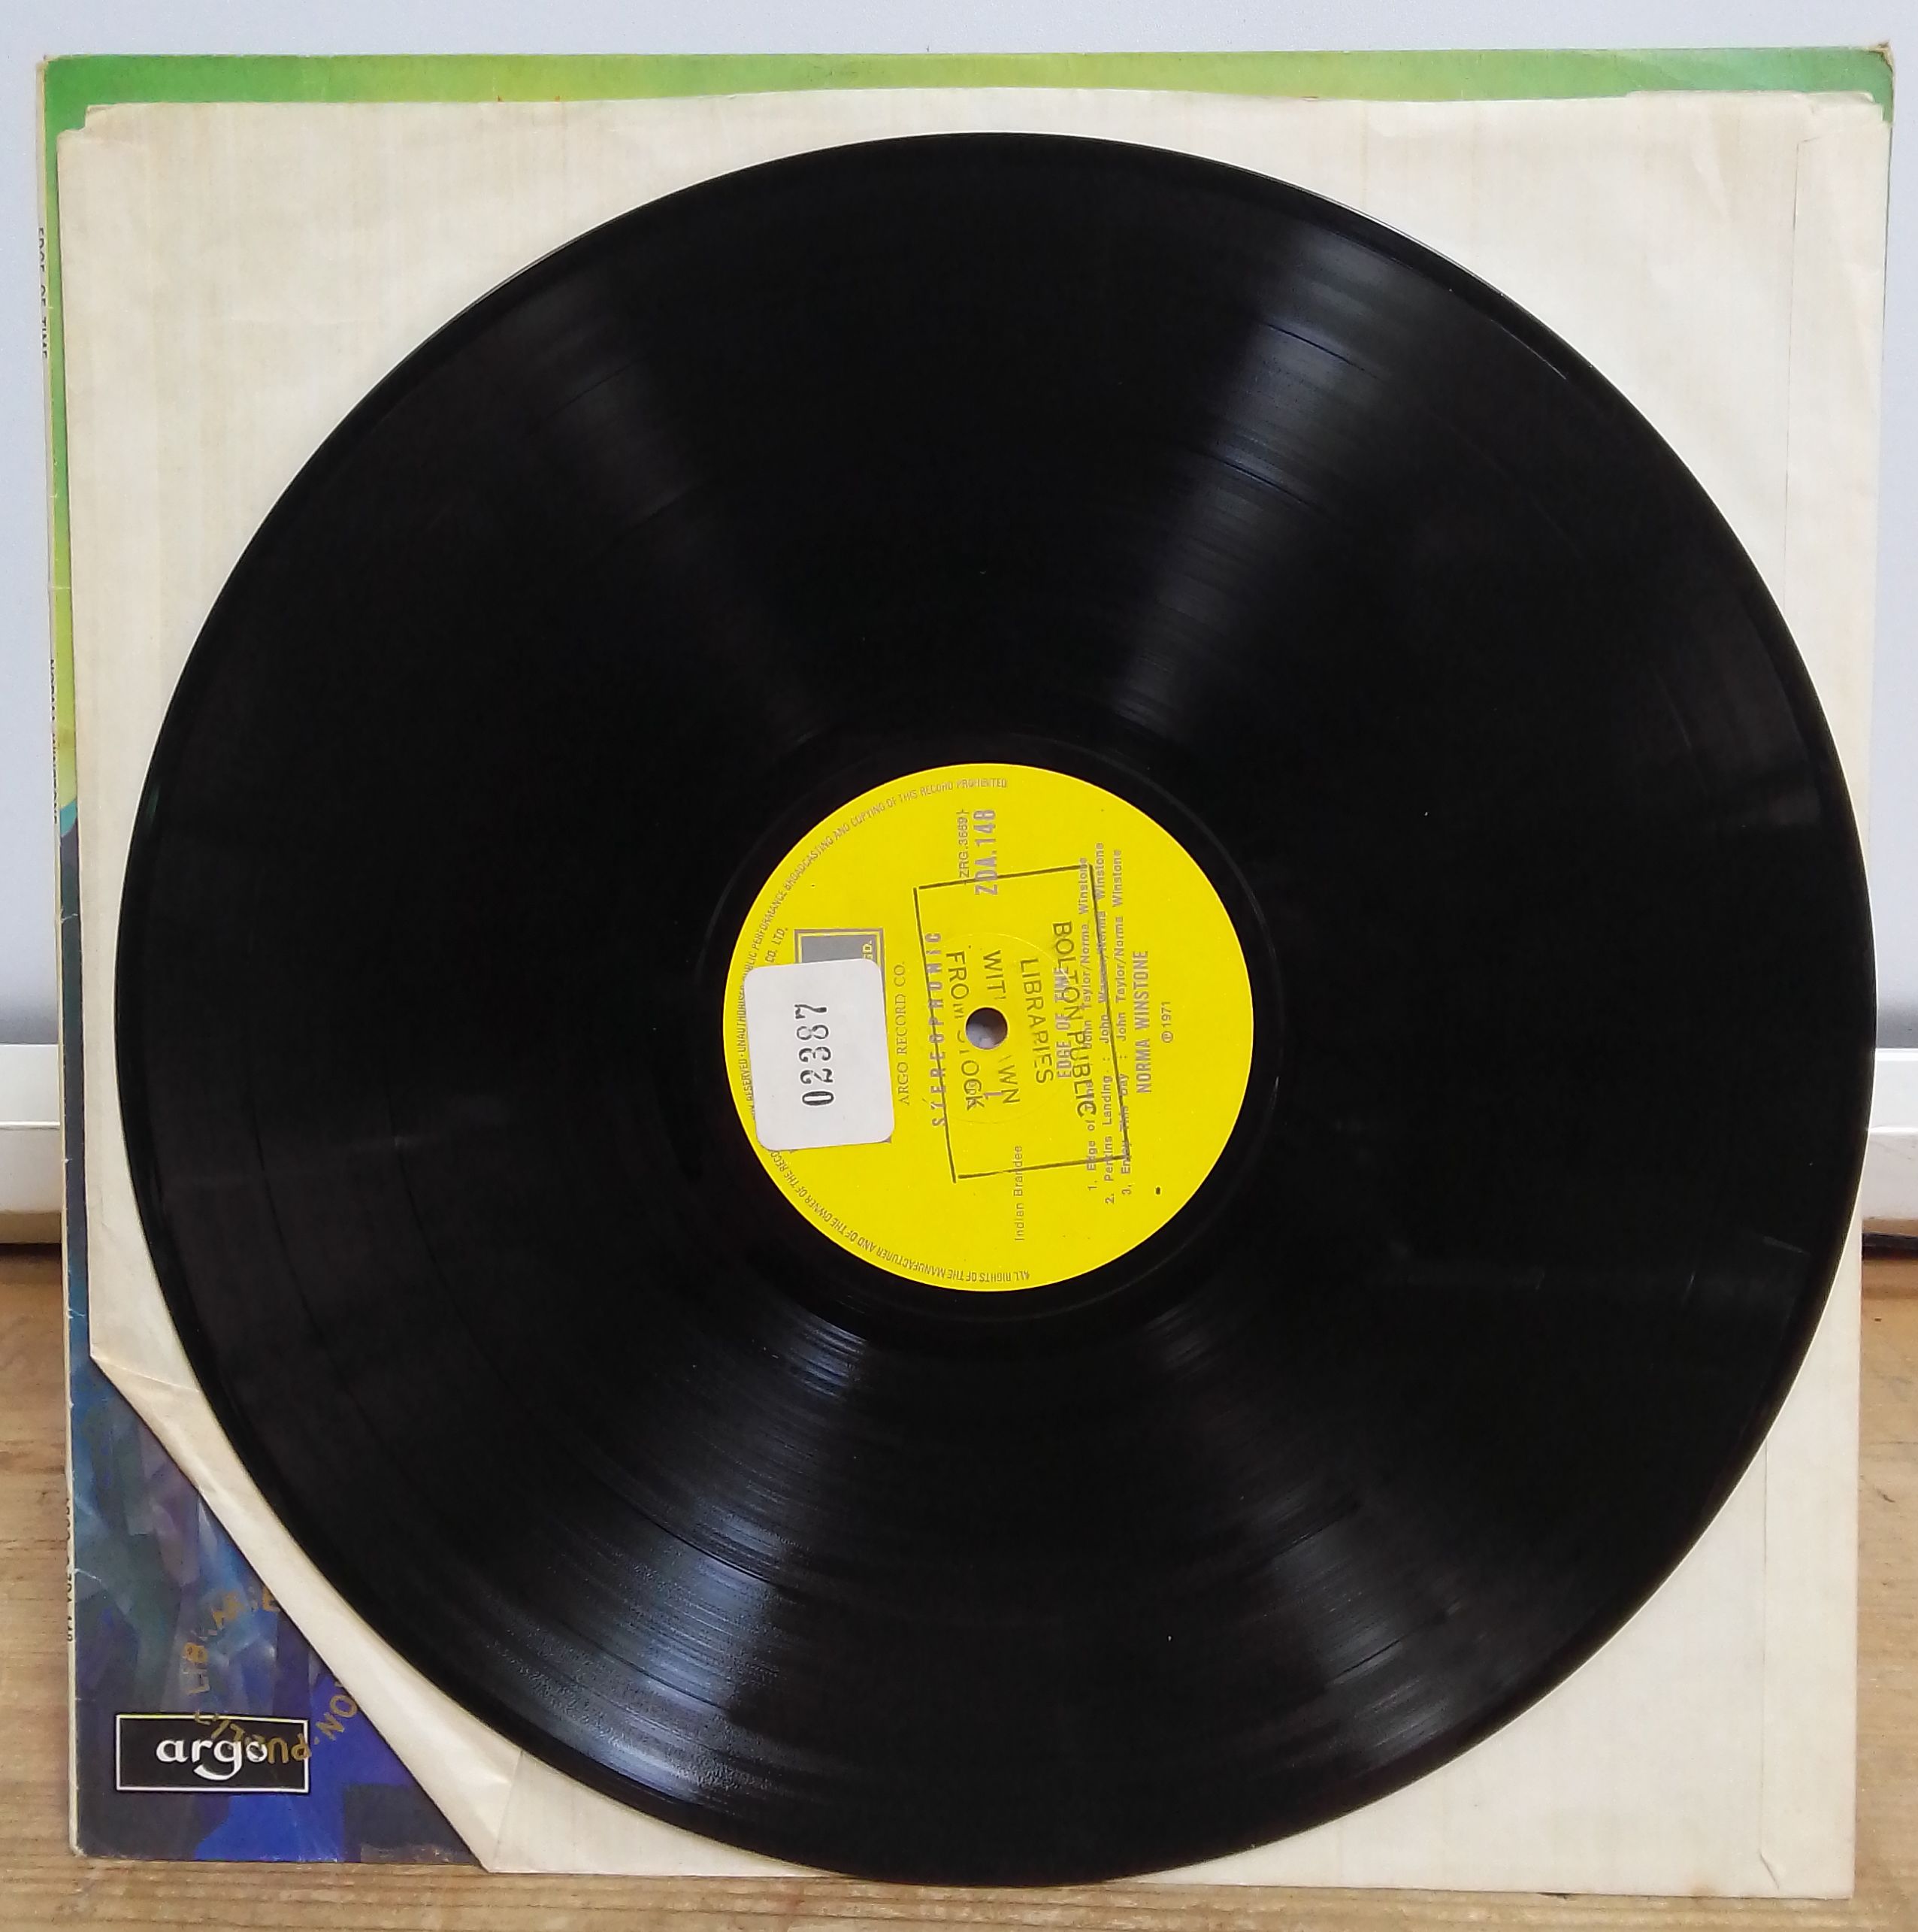 Norma Winstone - Edge of Time, stereo LP, 1st pressing, UK 1972, ZDA 148, ex library copy. - Image 4 of 4